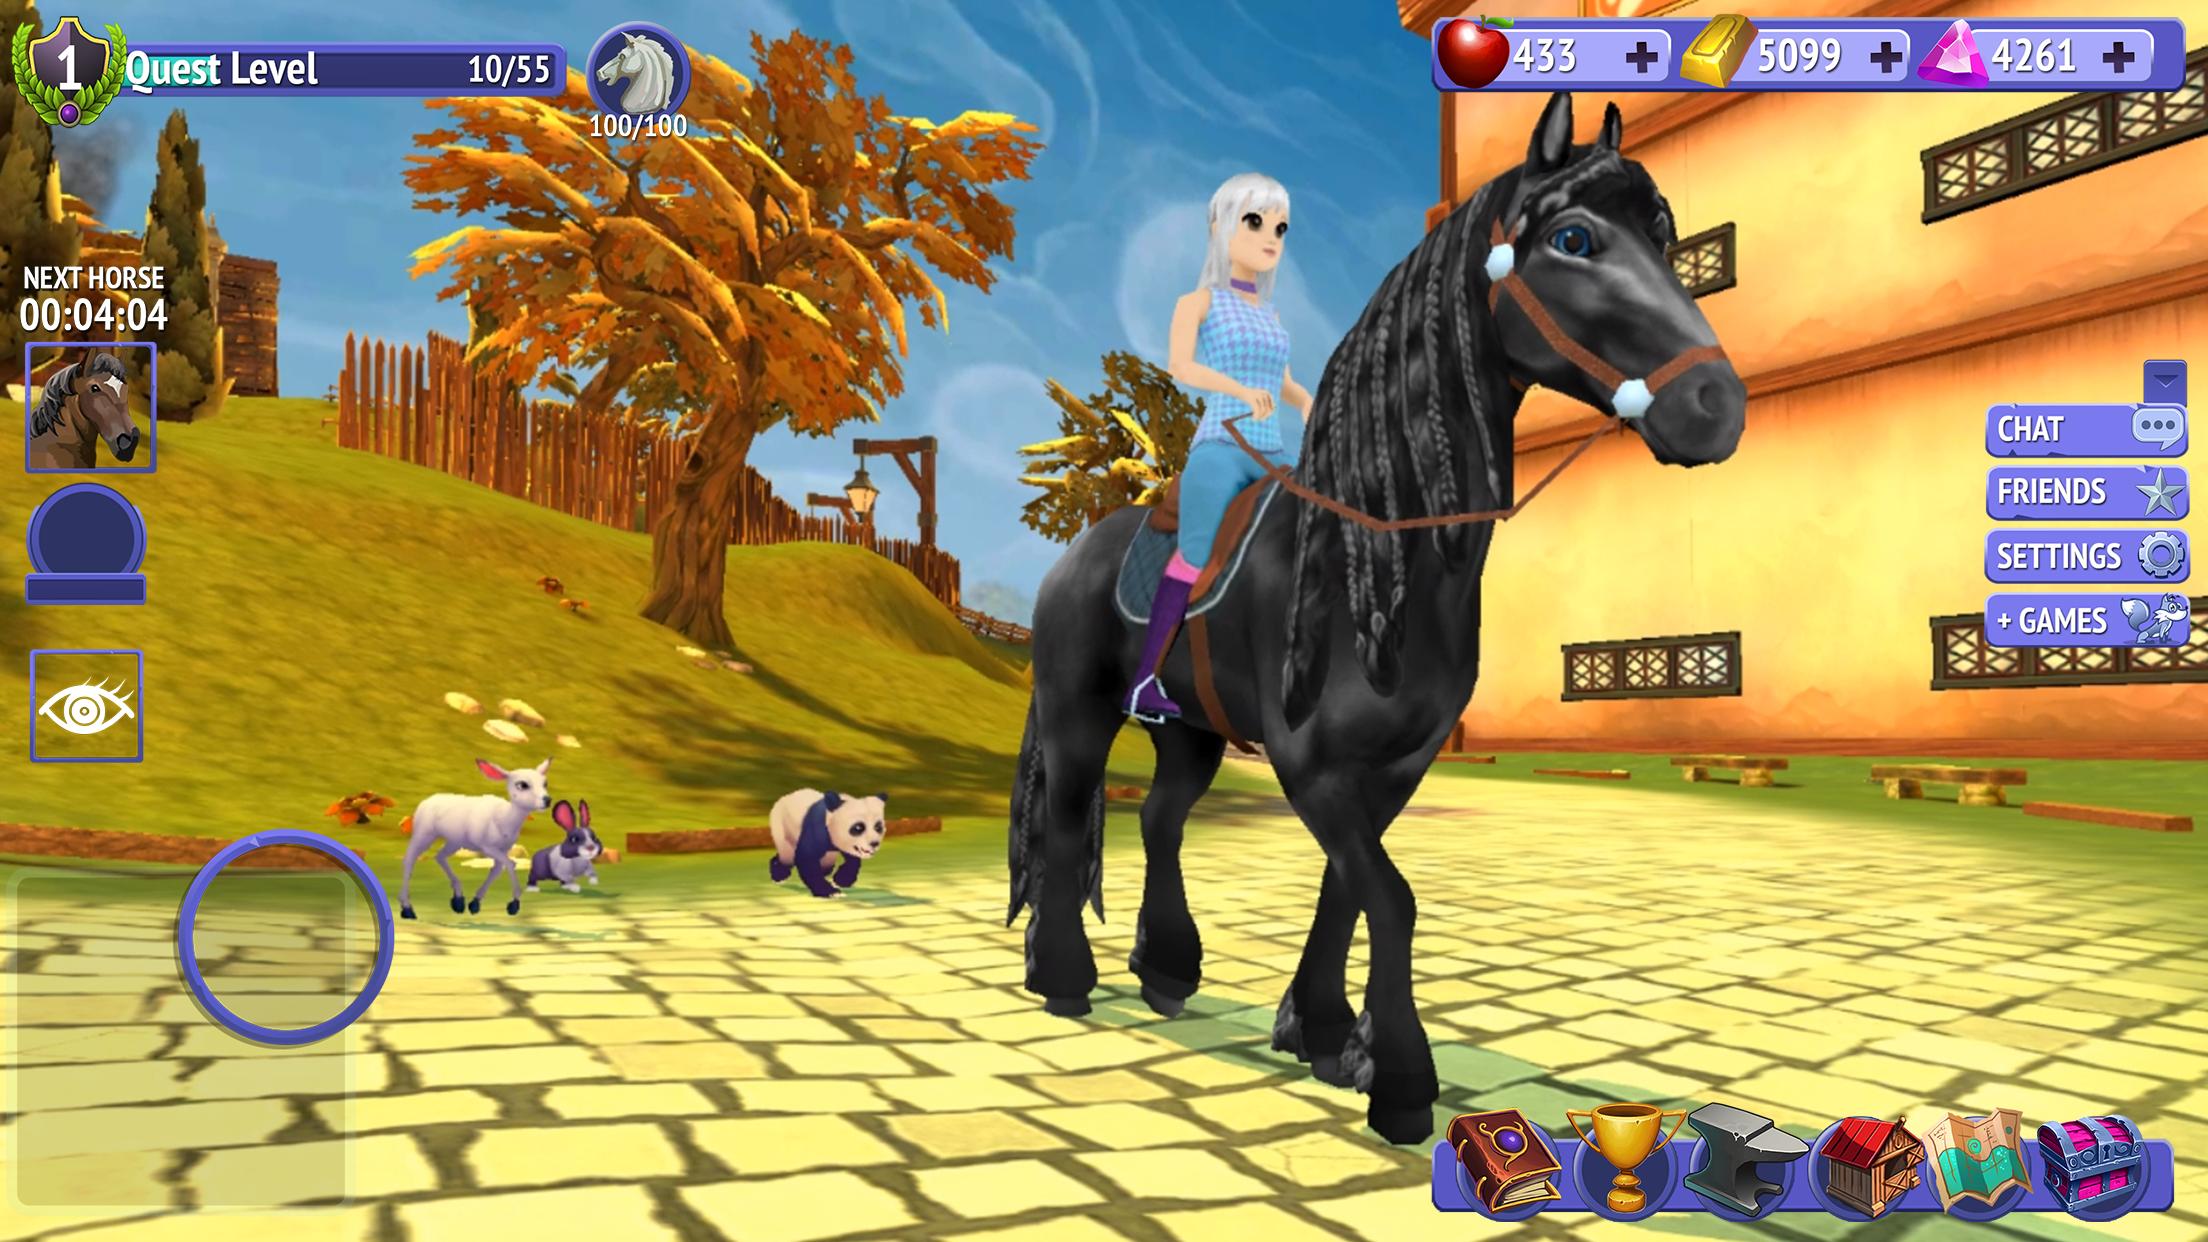 Horse Riding Tales - Ride With Friends 780 Screenshot 1